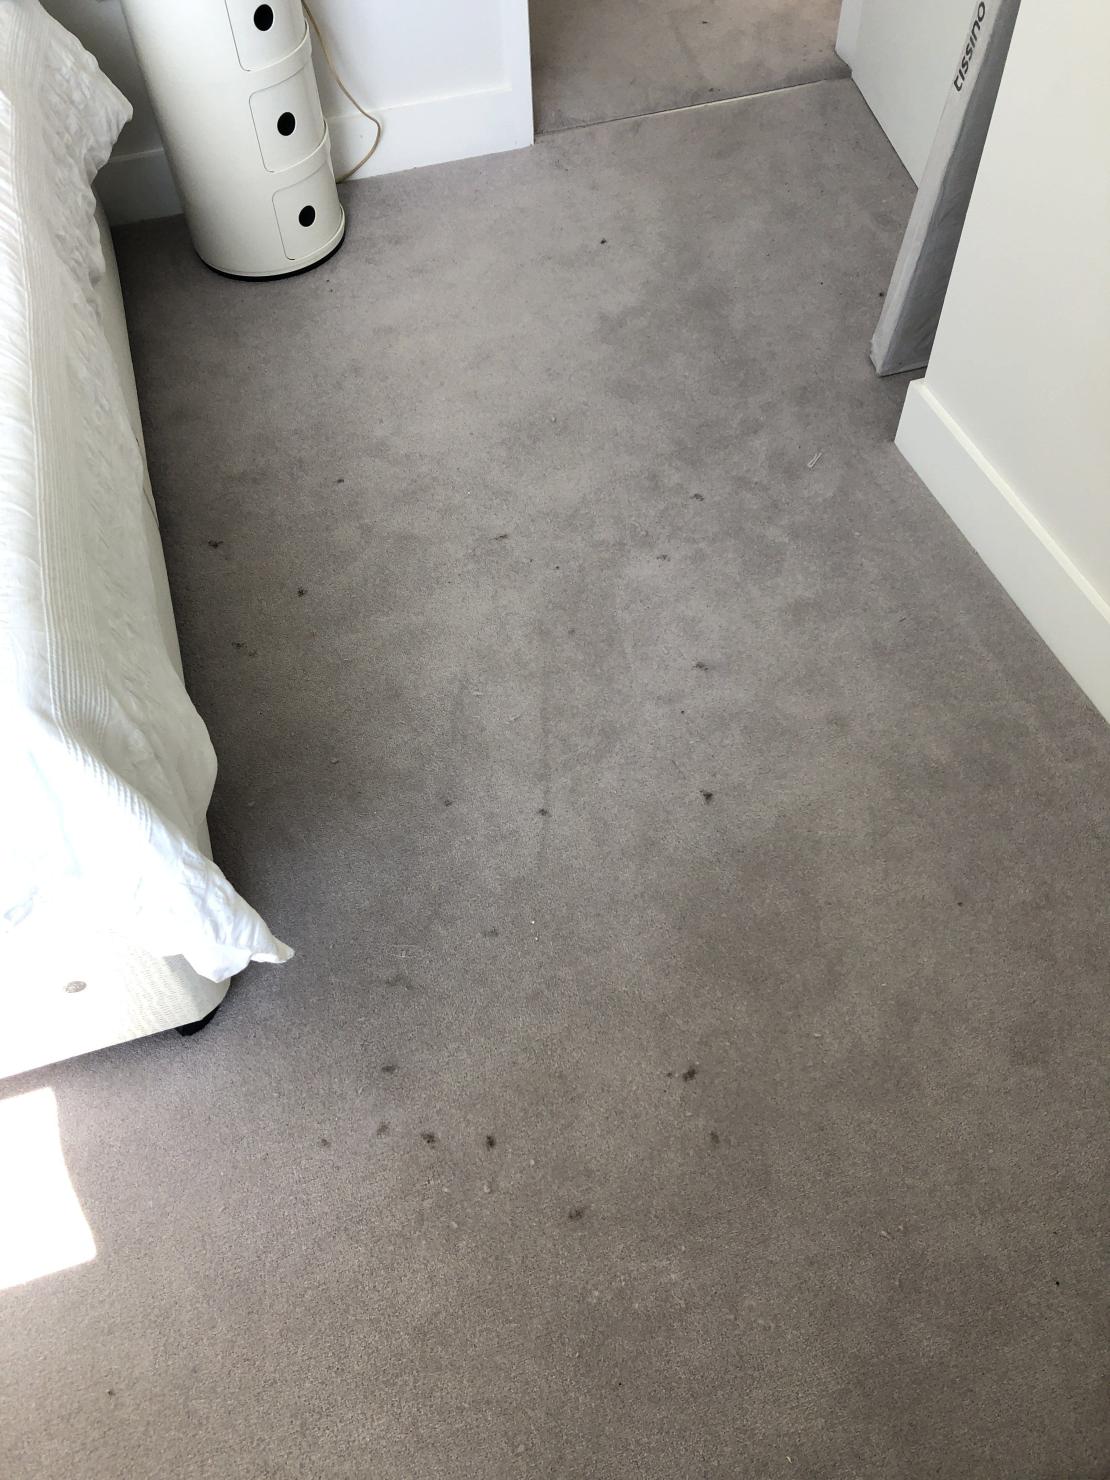 Tar Stain Removal & Wool Carpet Cleaning In Culcheth ...